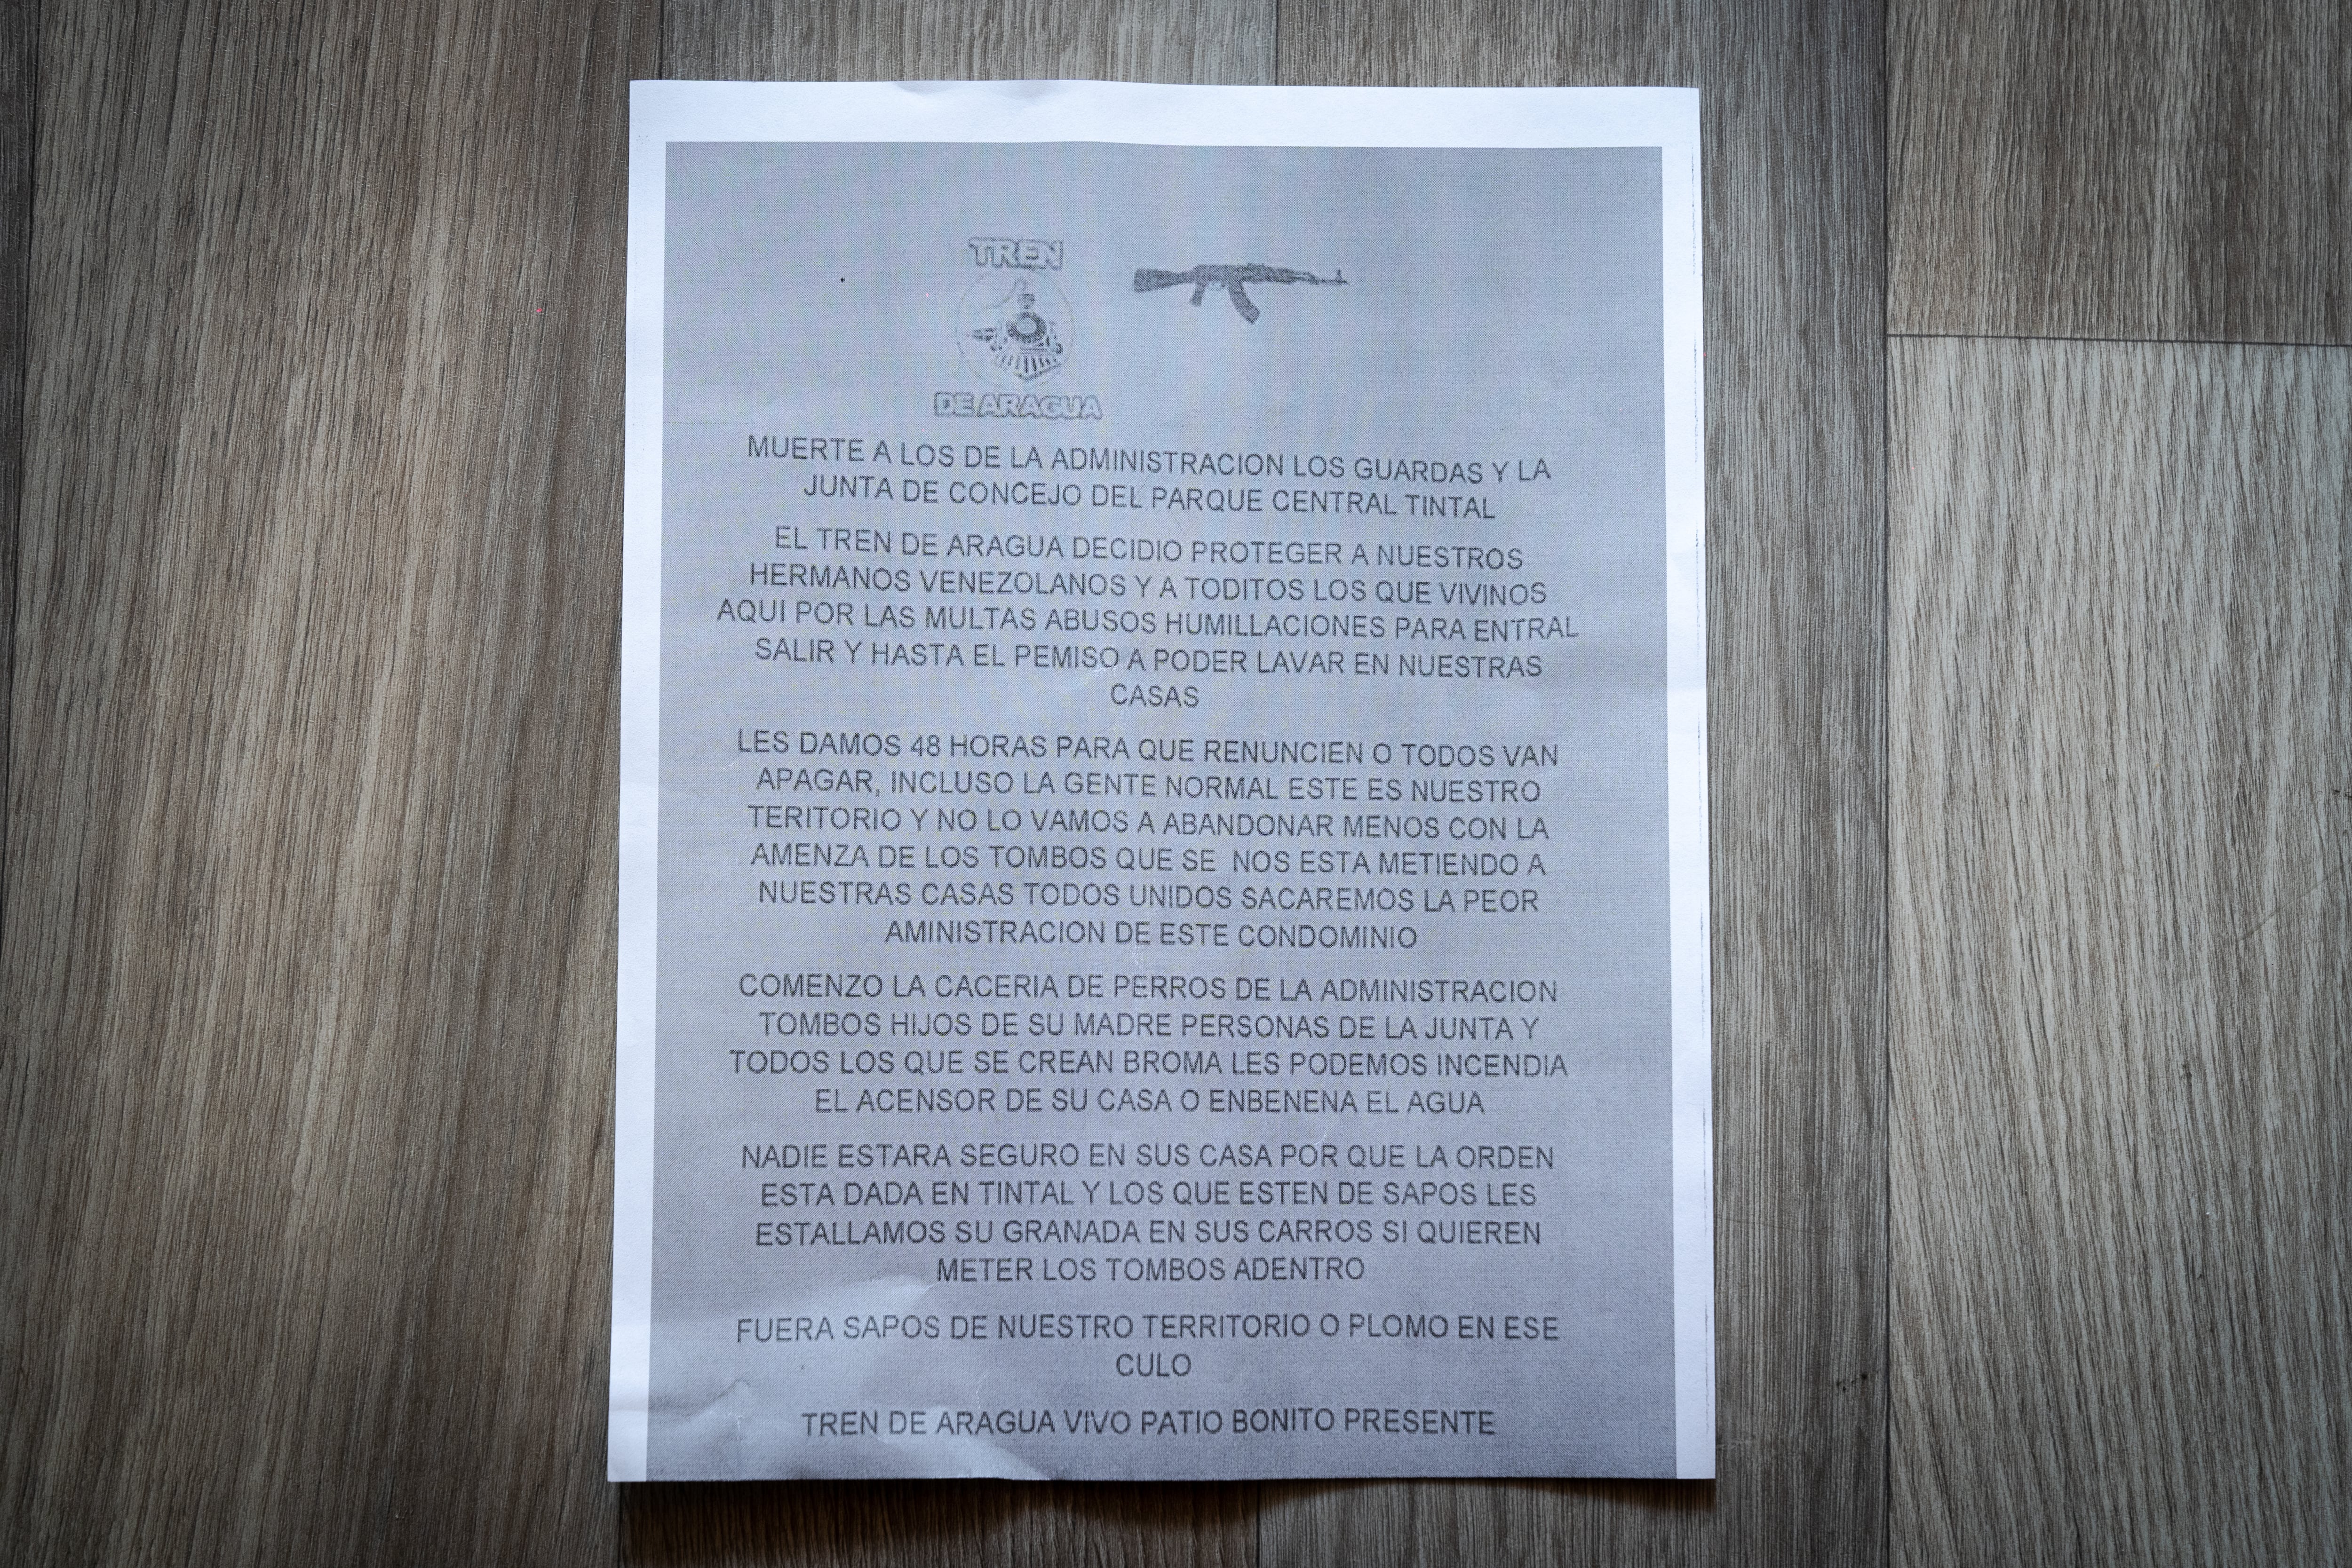 Threat signed by Tren de Aragua against a residential complex in Bogotá (Colombia) on February 23, 2023.